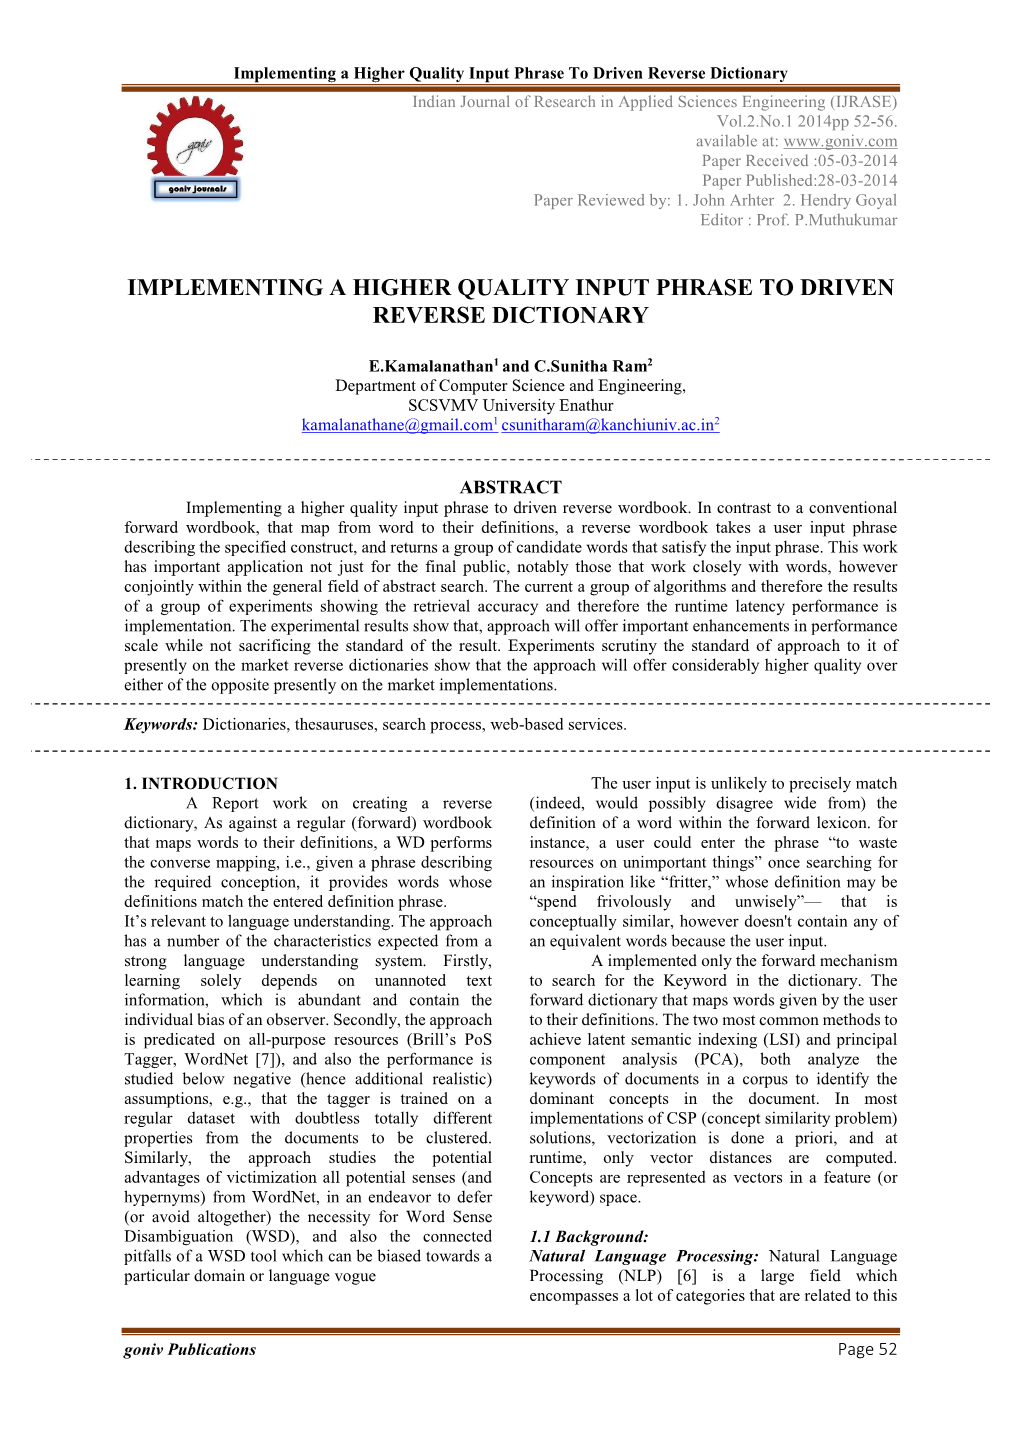 Implementing a Higher Quality Input Phrase to Driven Reverse Dictionary Indian Journal of Research in Applied Sciences Engineering (IJRASE) Vol.2.No.1 2014Pp 52-56